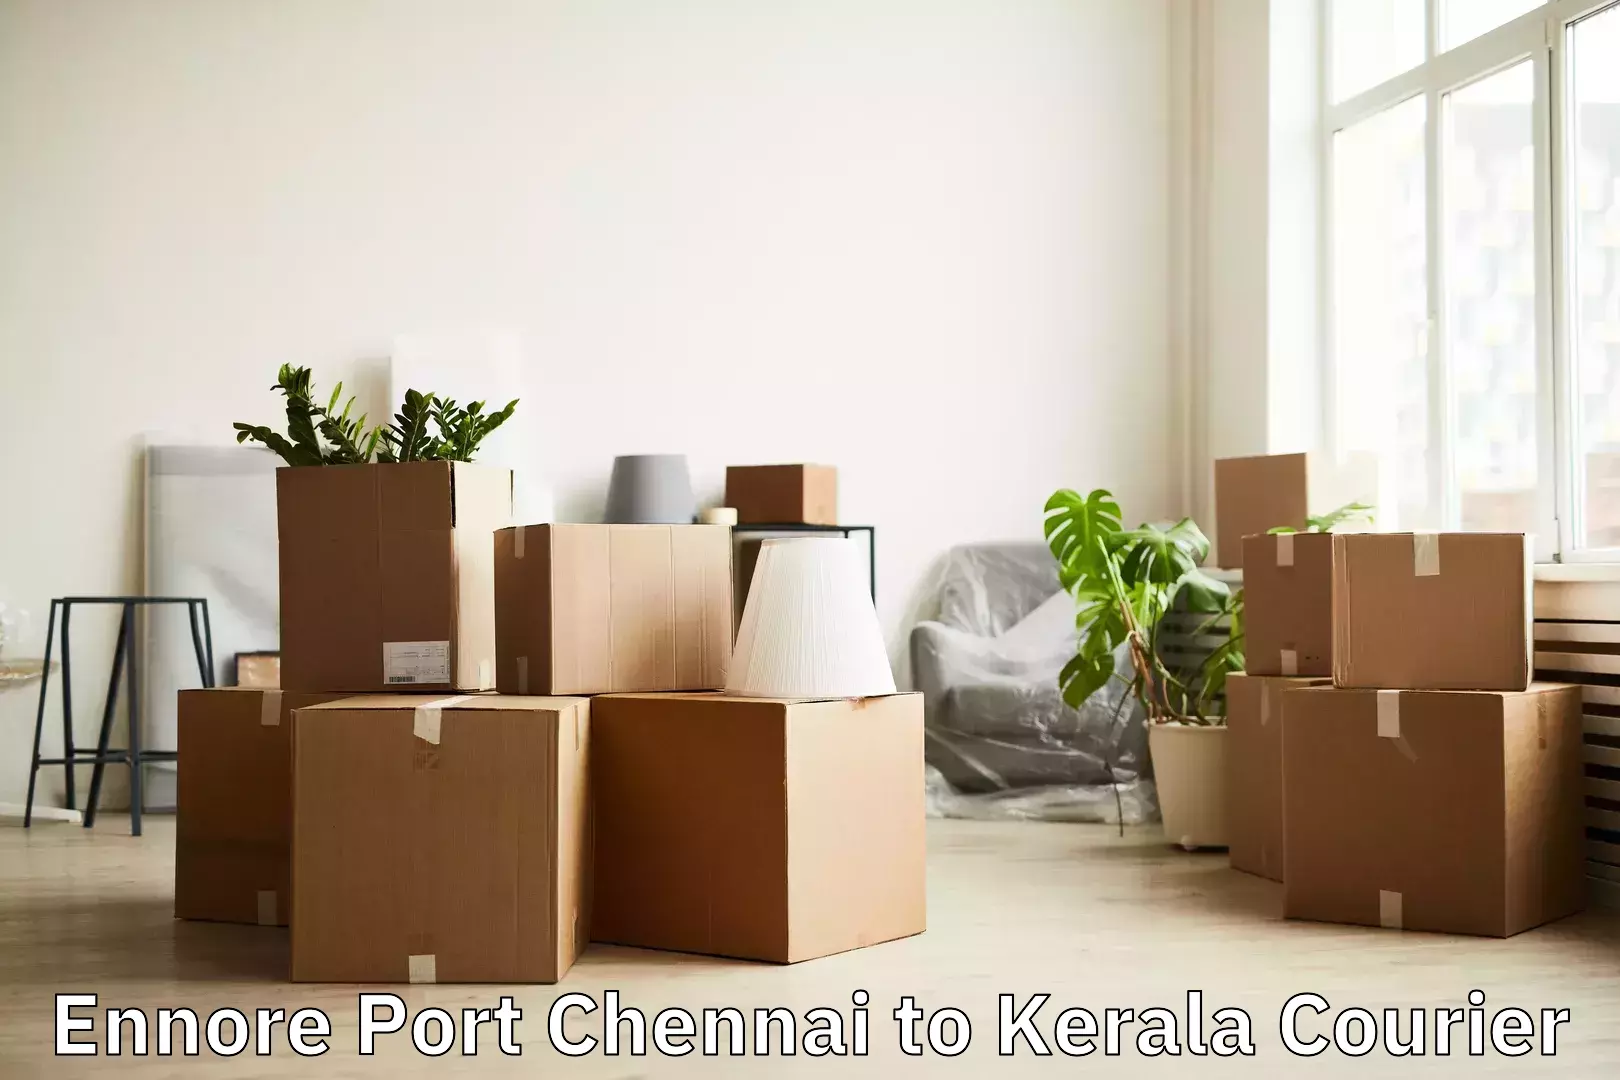 Luggage shipment processing in Ennore Port Chennai to Cochin University of Science and Technology